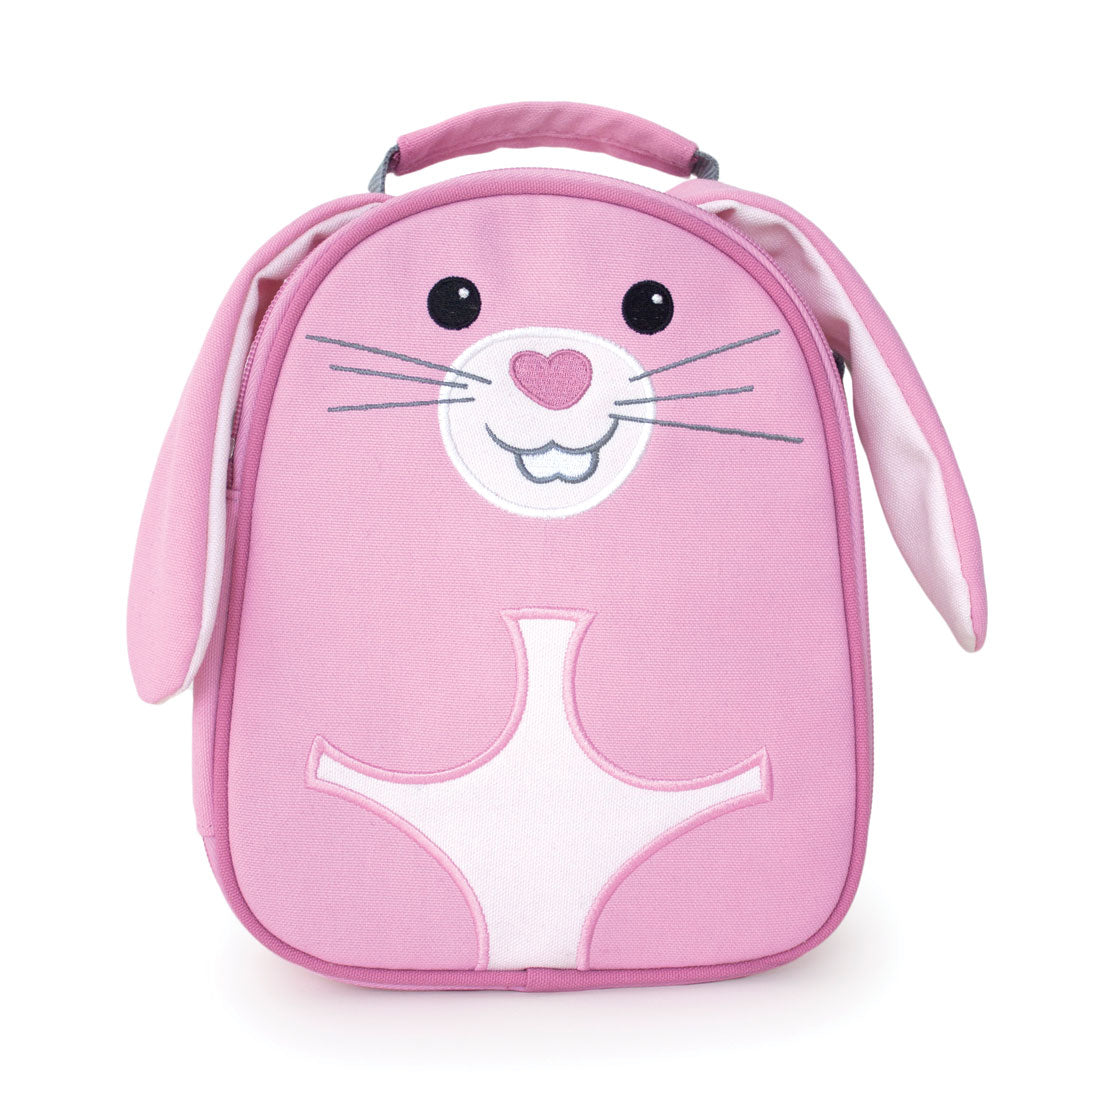 Recycled Fabric Lunch Pack - Bunny